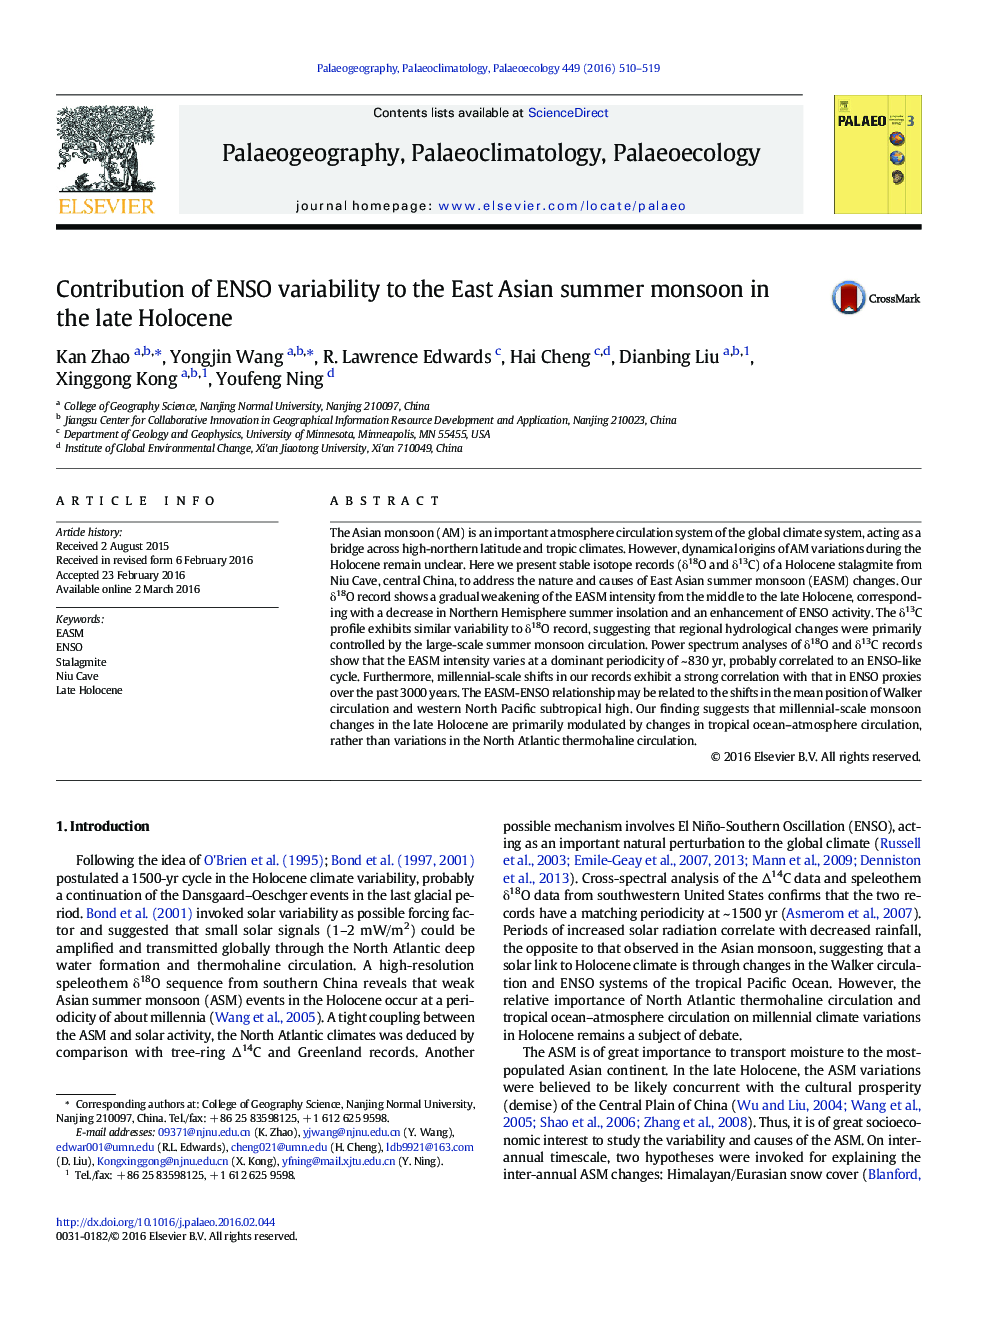 Contribution of ENSO variability to the East Asian summer monsoon in the late Holocene